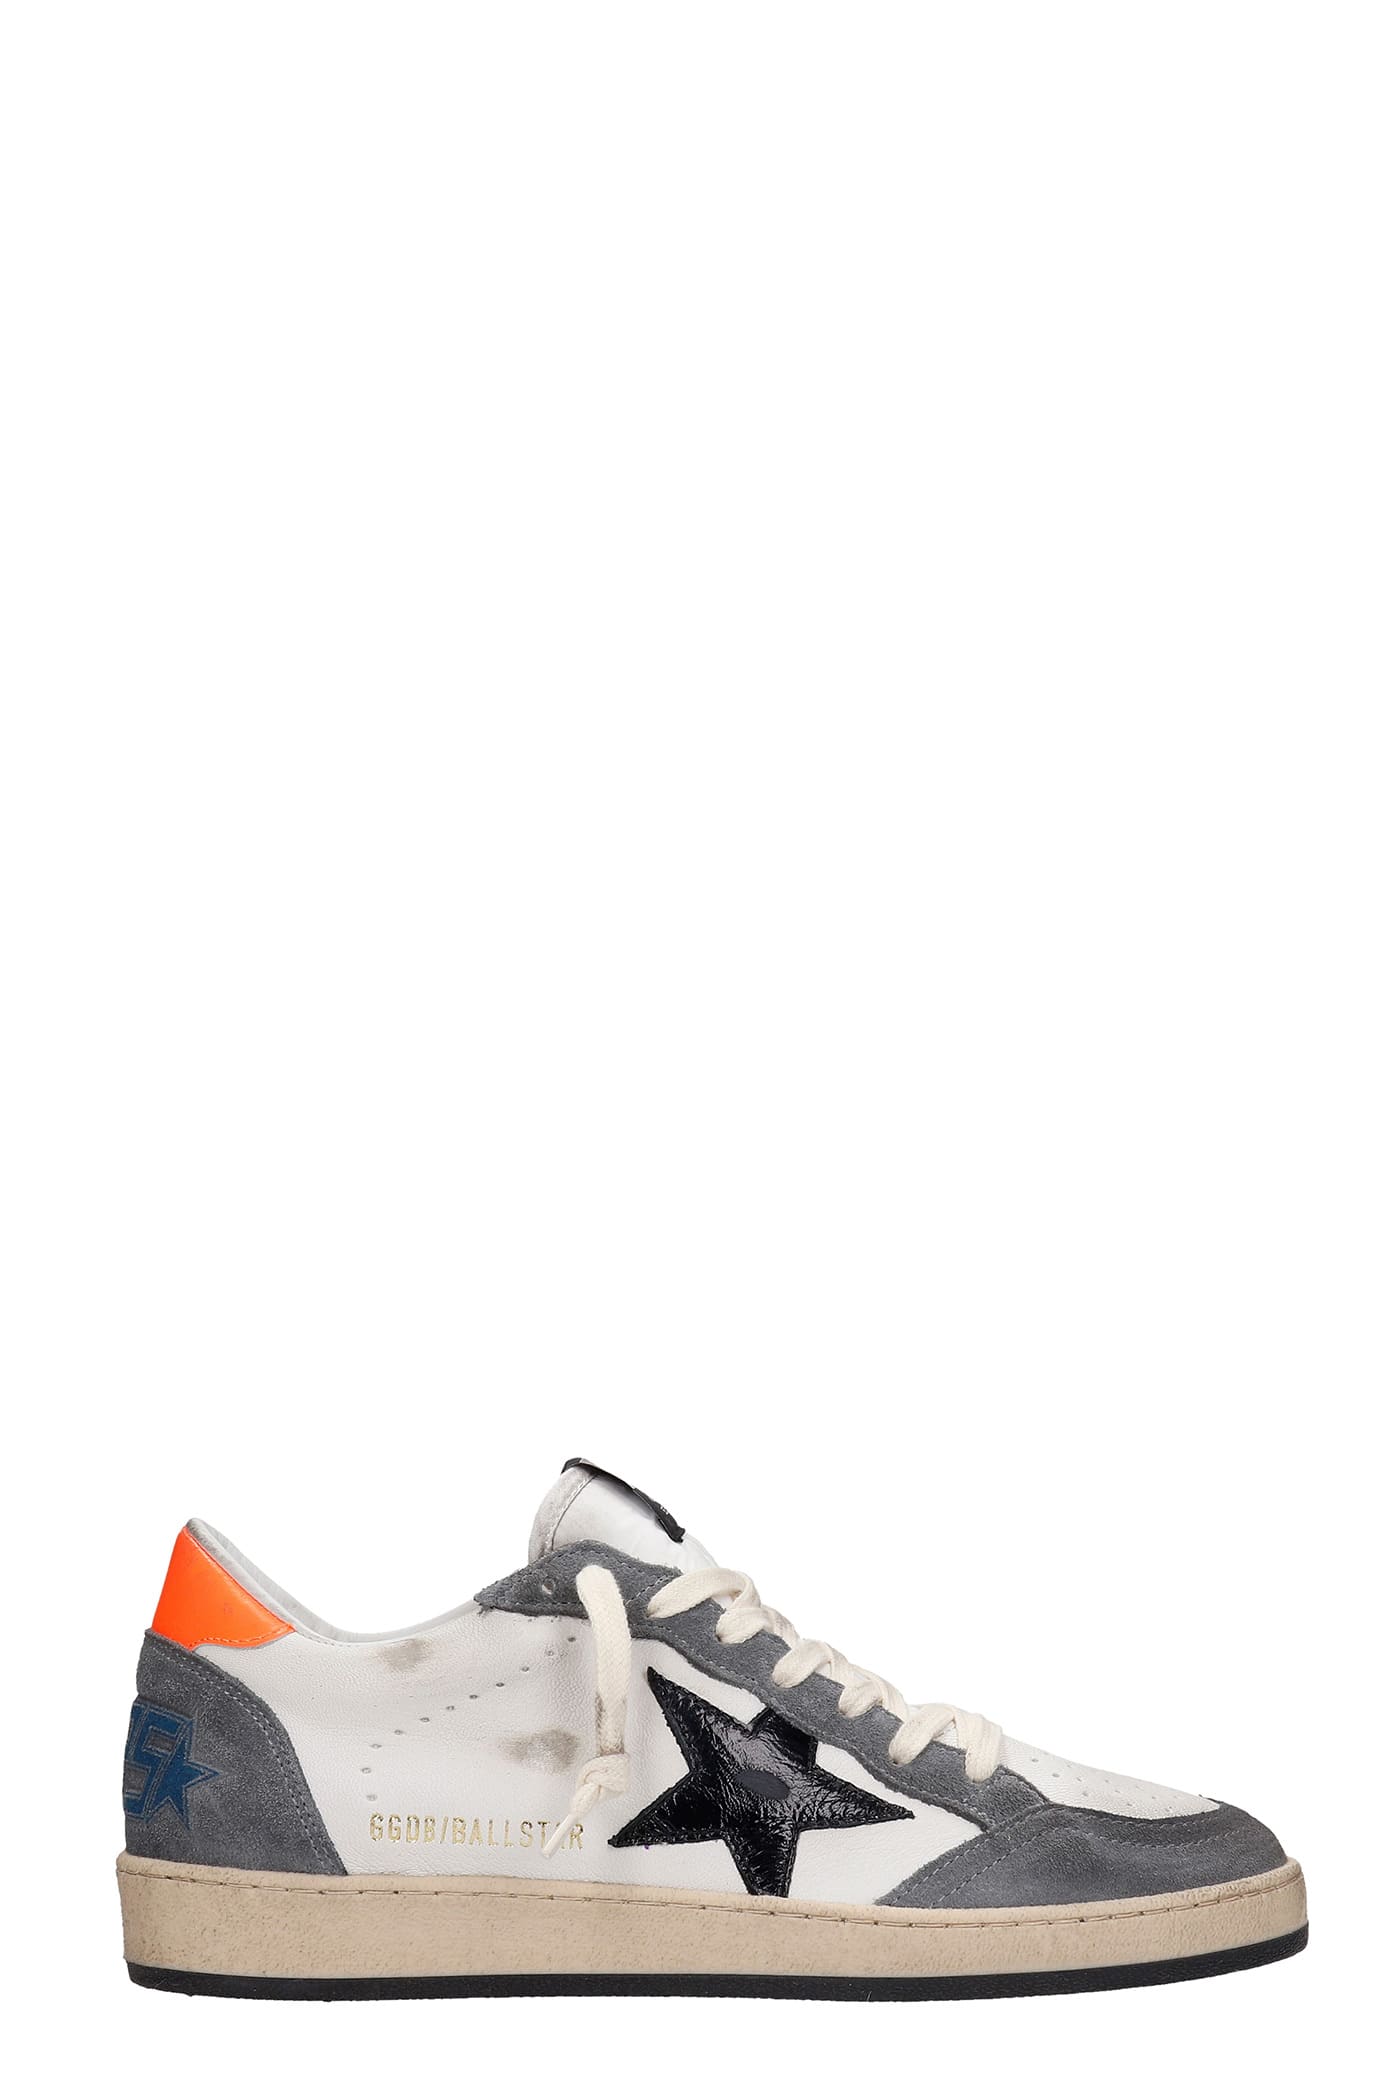 Golden Goose Ball Star Sneakers In White Suede And Leather